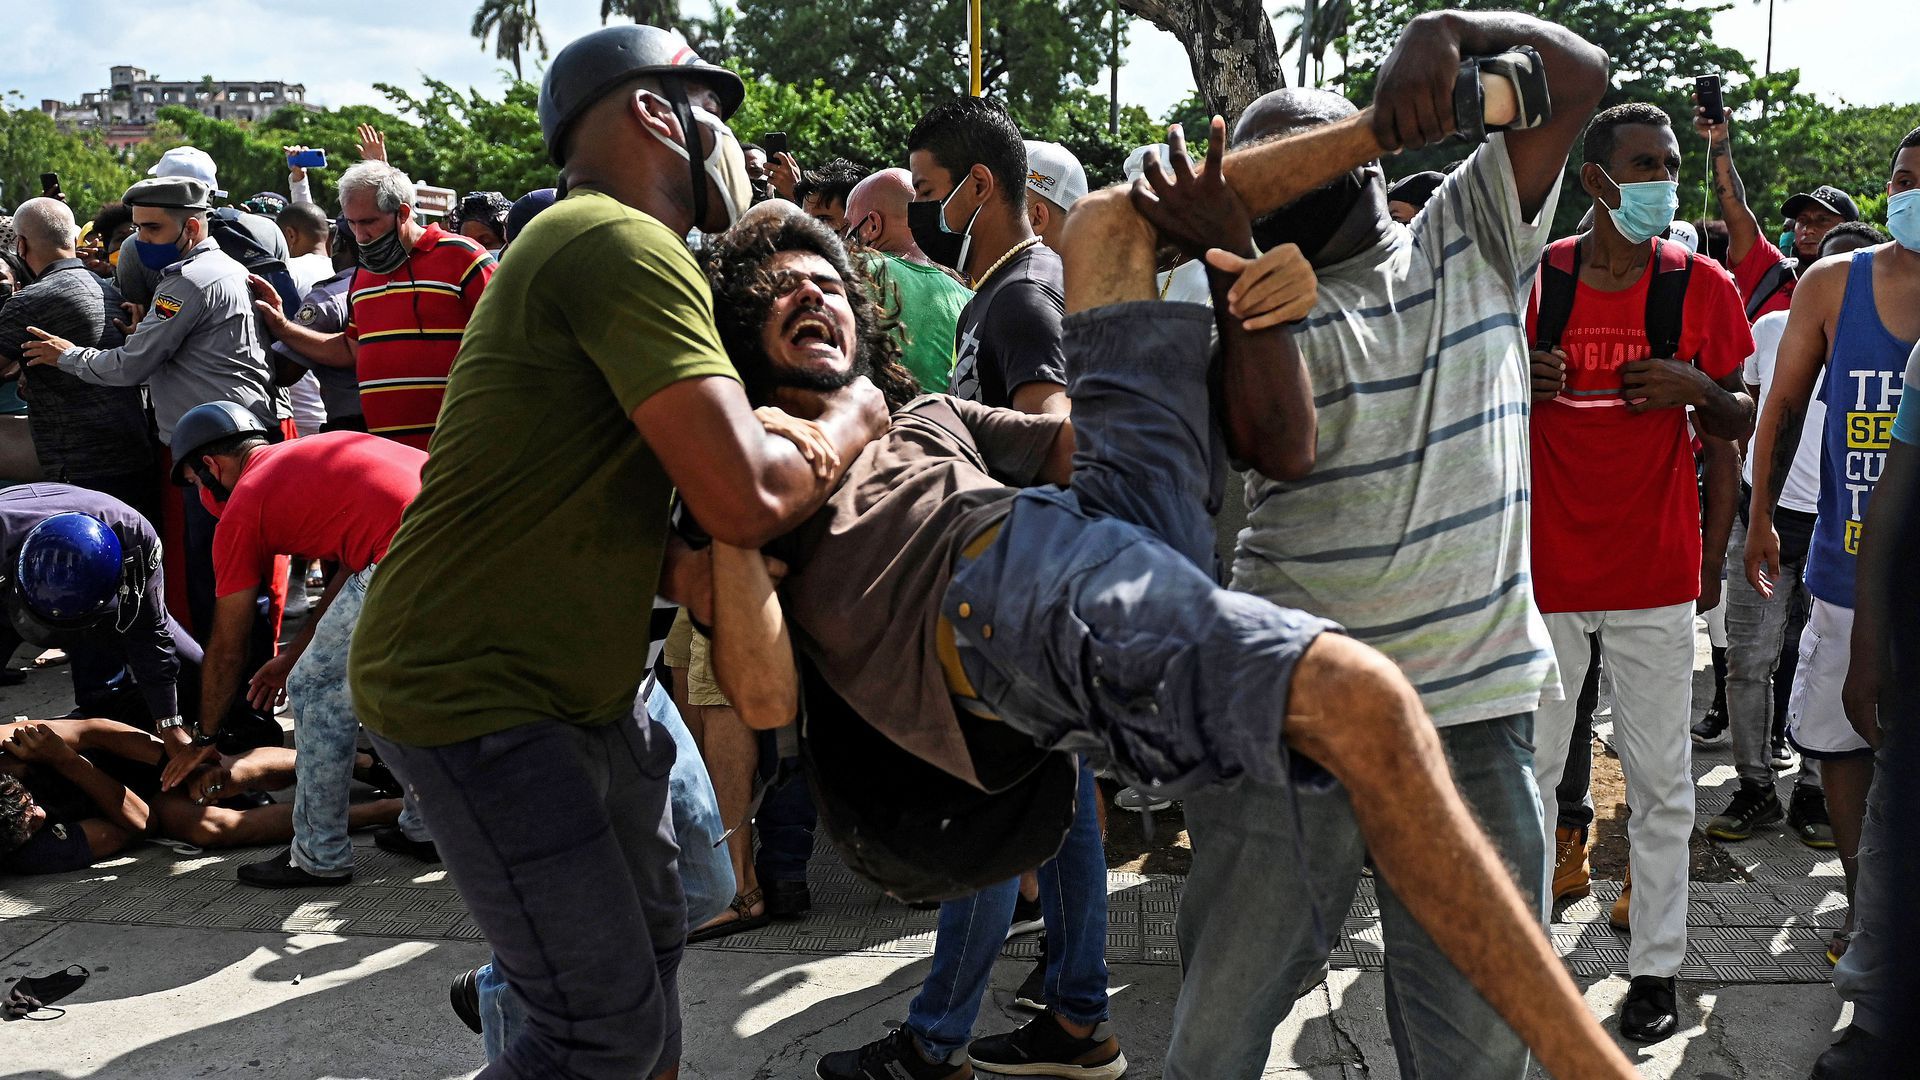 A young man, later identified as university student Leonardo Romero Negrín, is arrested during the July 11 protests.